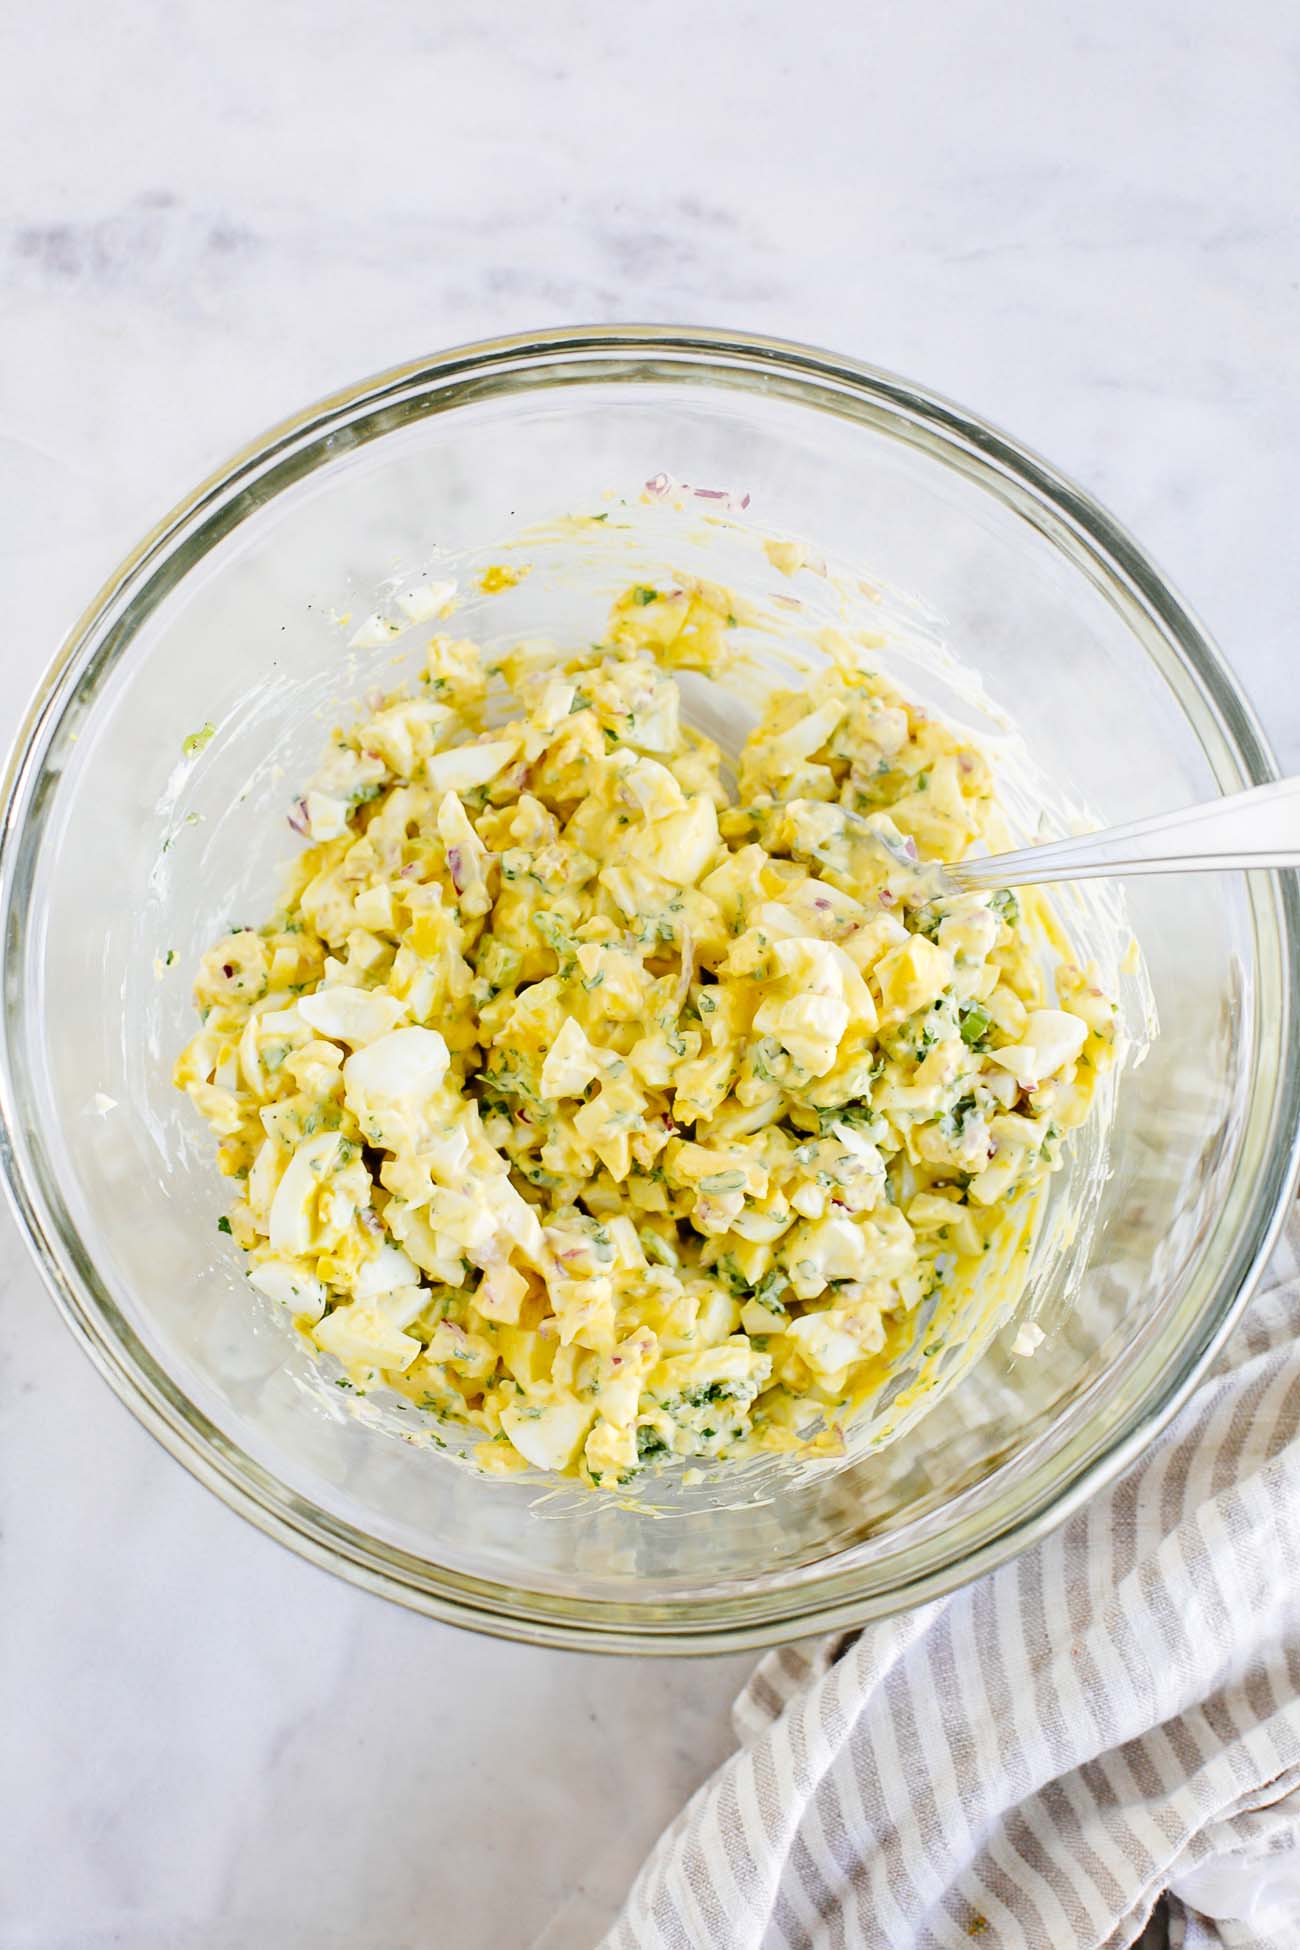 Egg salad being mixed in a bowl.